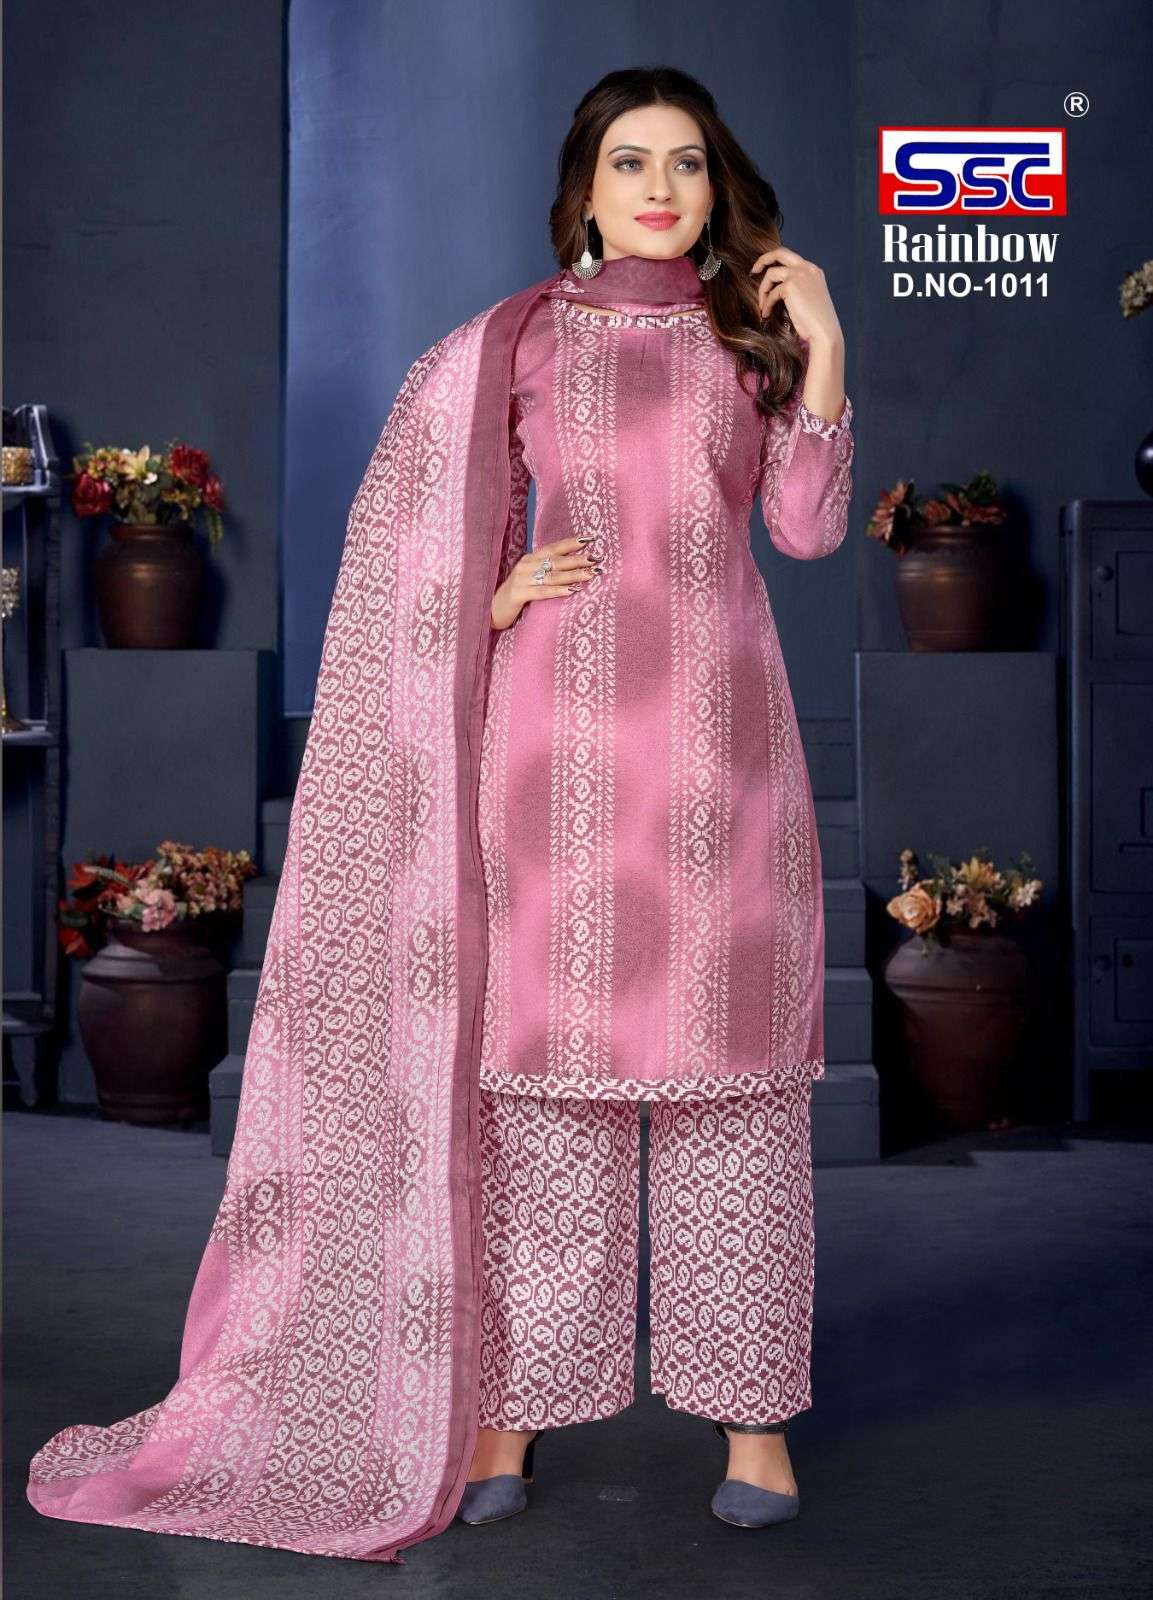 Rainbow By Shree Shanti Creation 1001 To 1012 Series Beautiful Suits Colorful Stylish Fancy Casual Wear & Ethnic Wear Soft Cotton Print Dresses At Wholesale Price